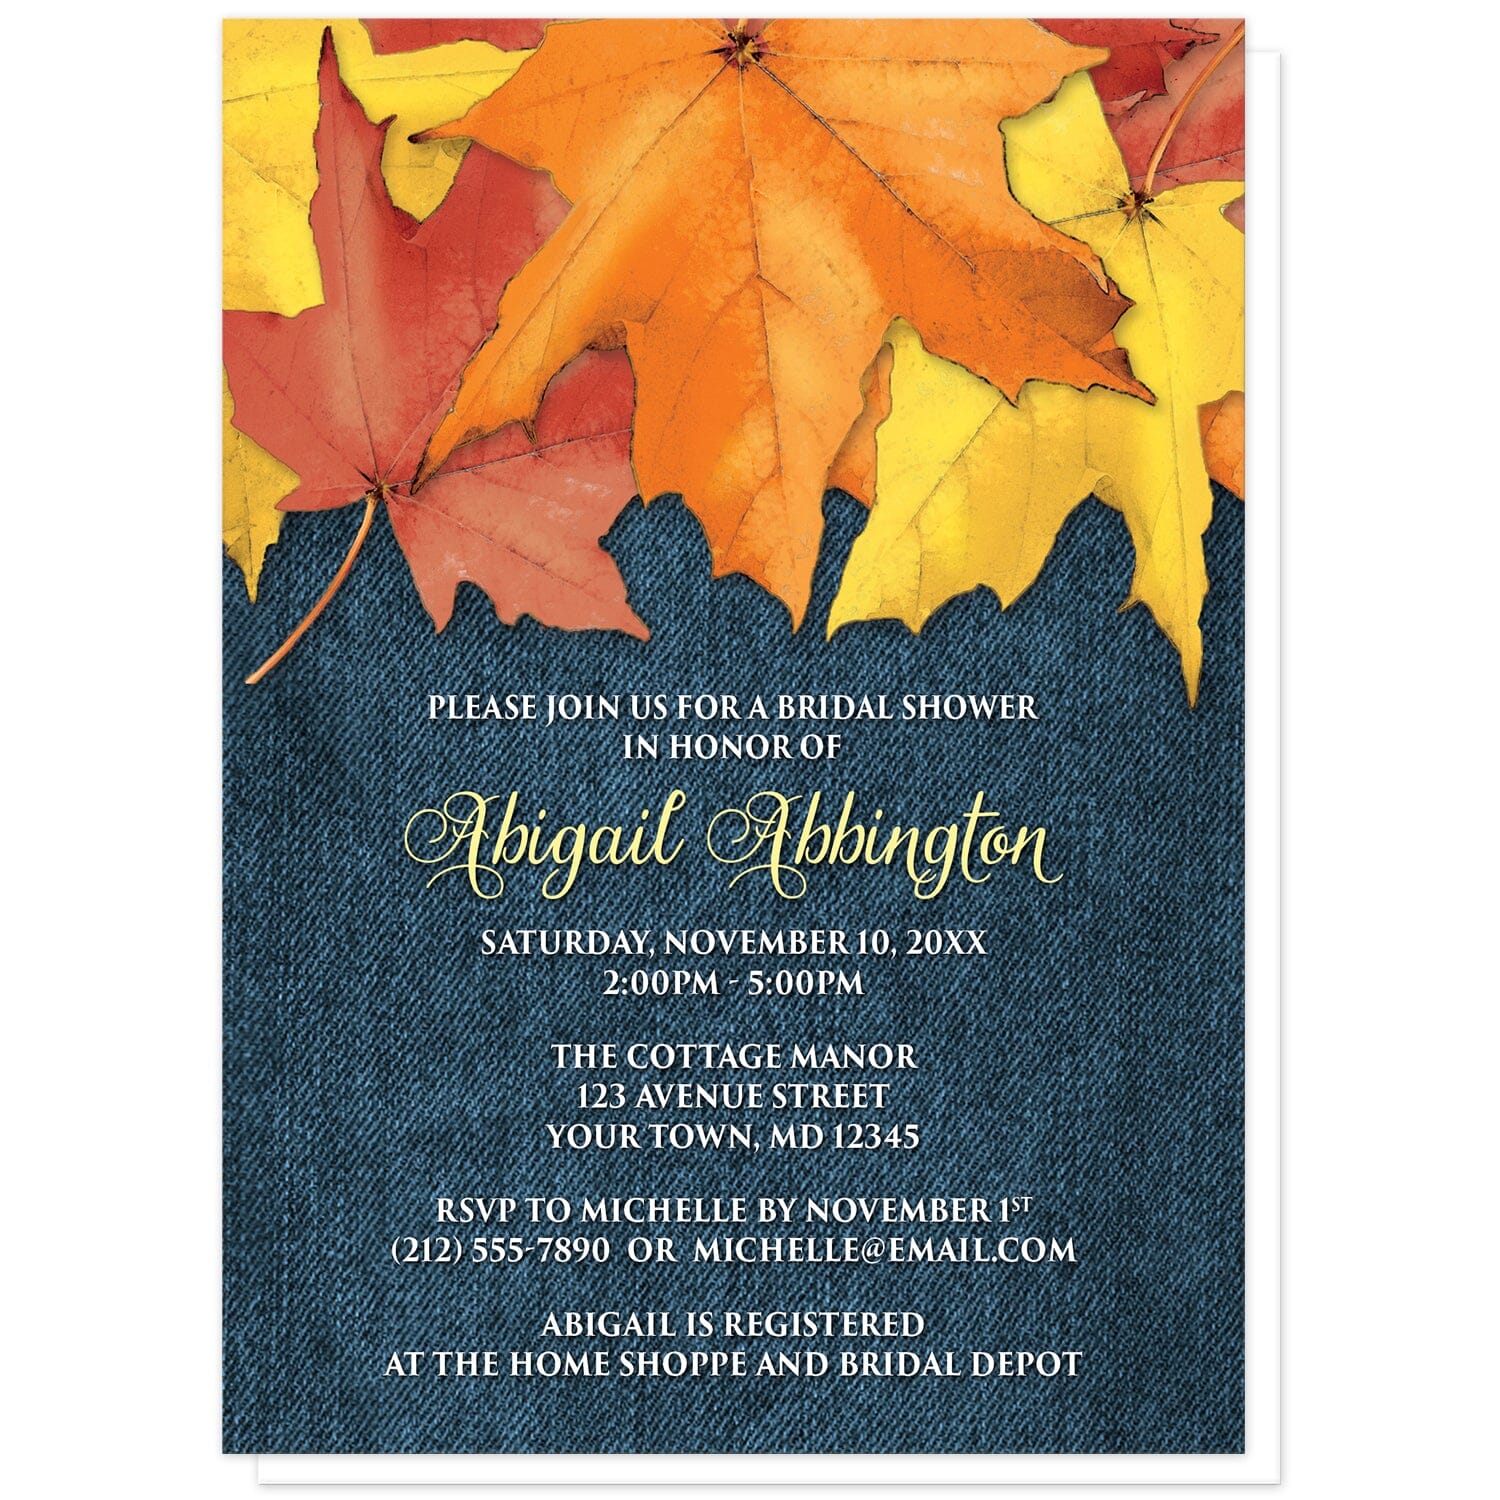 Rustic Autumn Leaves Denim Bridal Shower Invitations at Artistically Invited. Southern-inspired rustic autumn leaves denim bridal shower invitations with rustic yellow, orange, and red fall leaves along the top over a blue denim fabric illustration. Your personalized bridal shower celebration details are custom printed in yellow and white over the blue denim background.